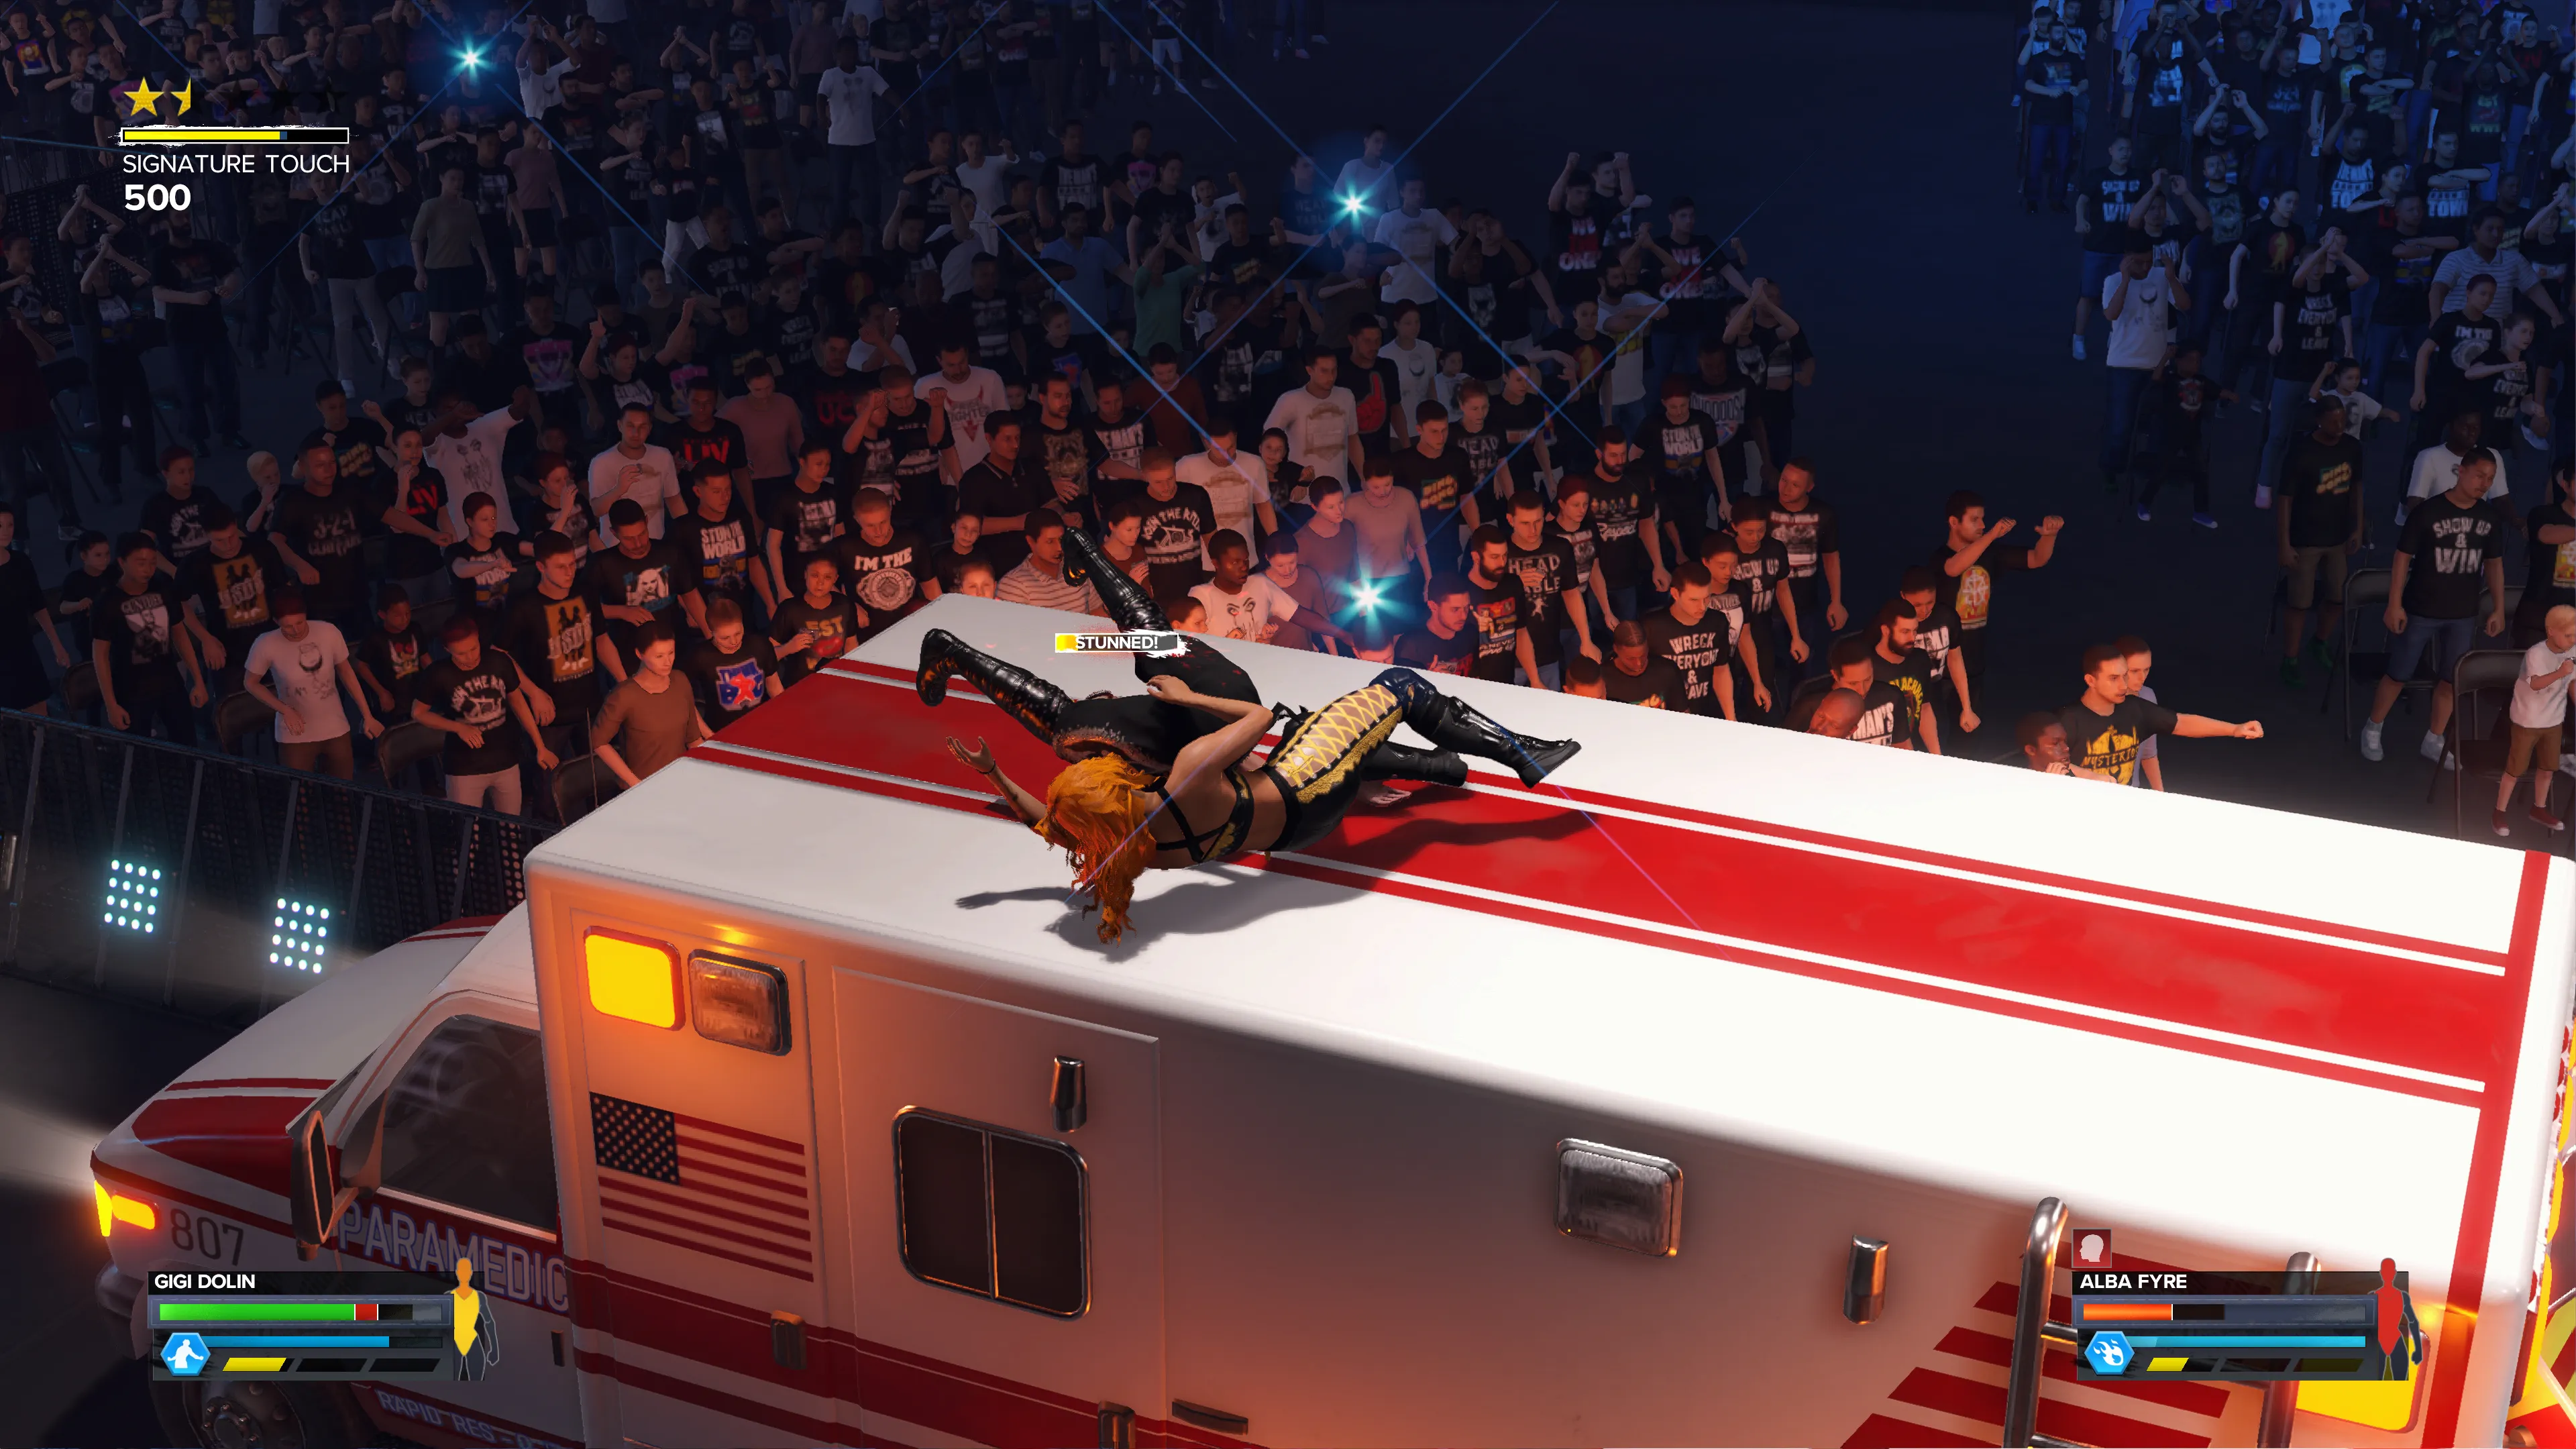 Gigi Dolin and Alba Fyre fight on the roof of an ambulance in an Ambulance Match in WWE 2K24.